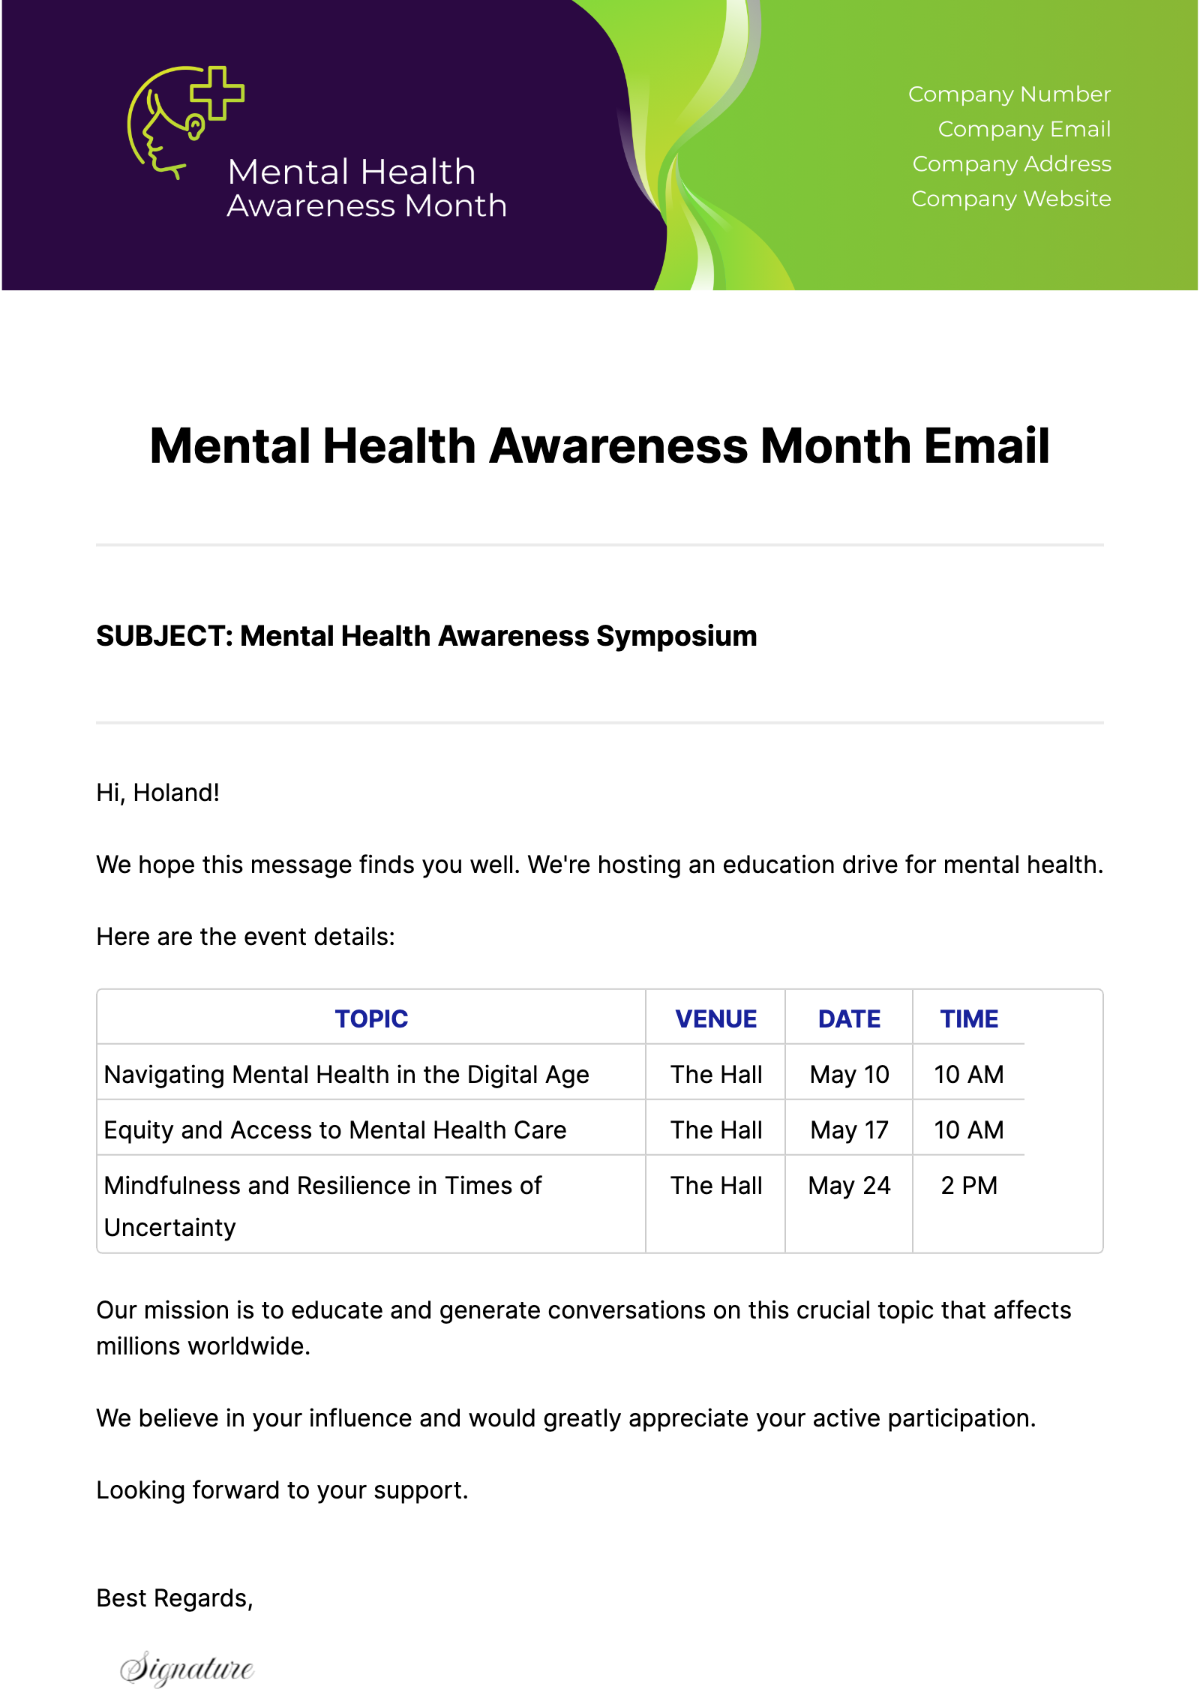 Free Mental Health Awareness Month Email Template